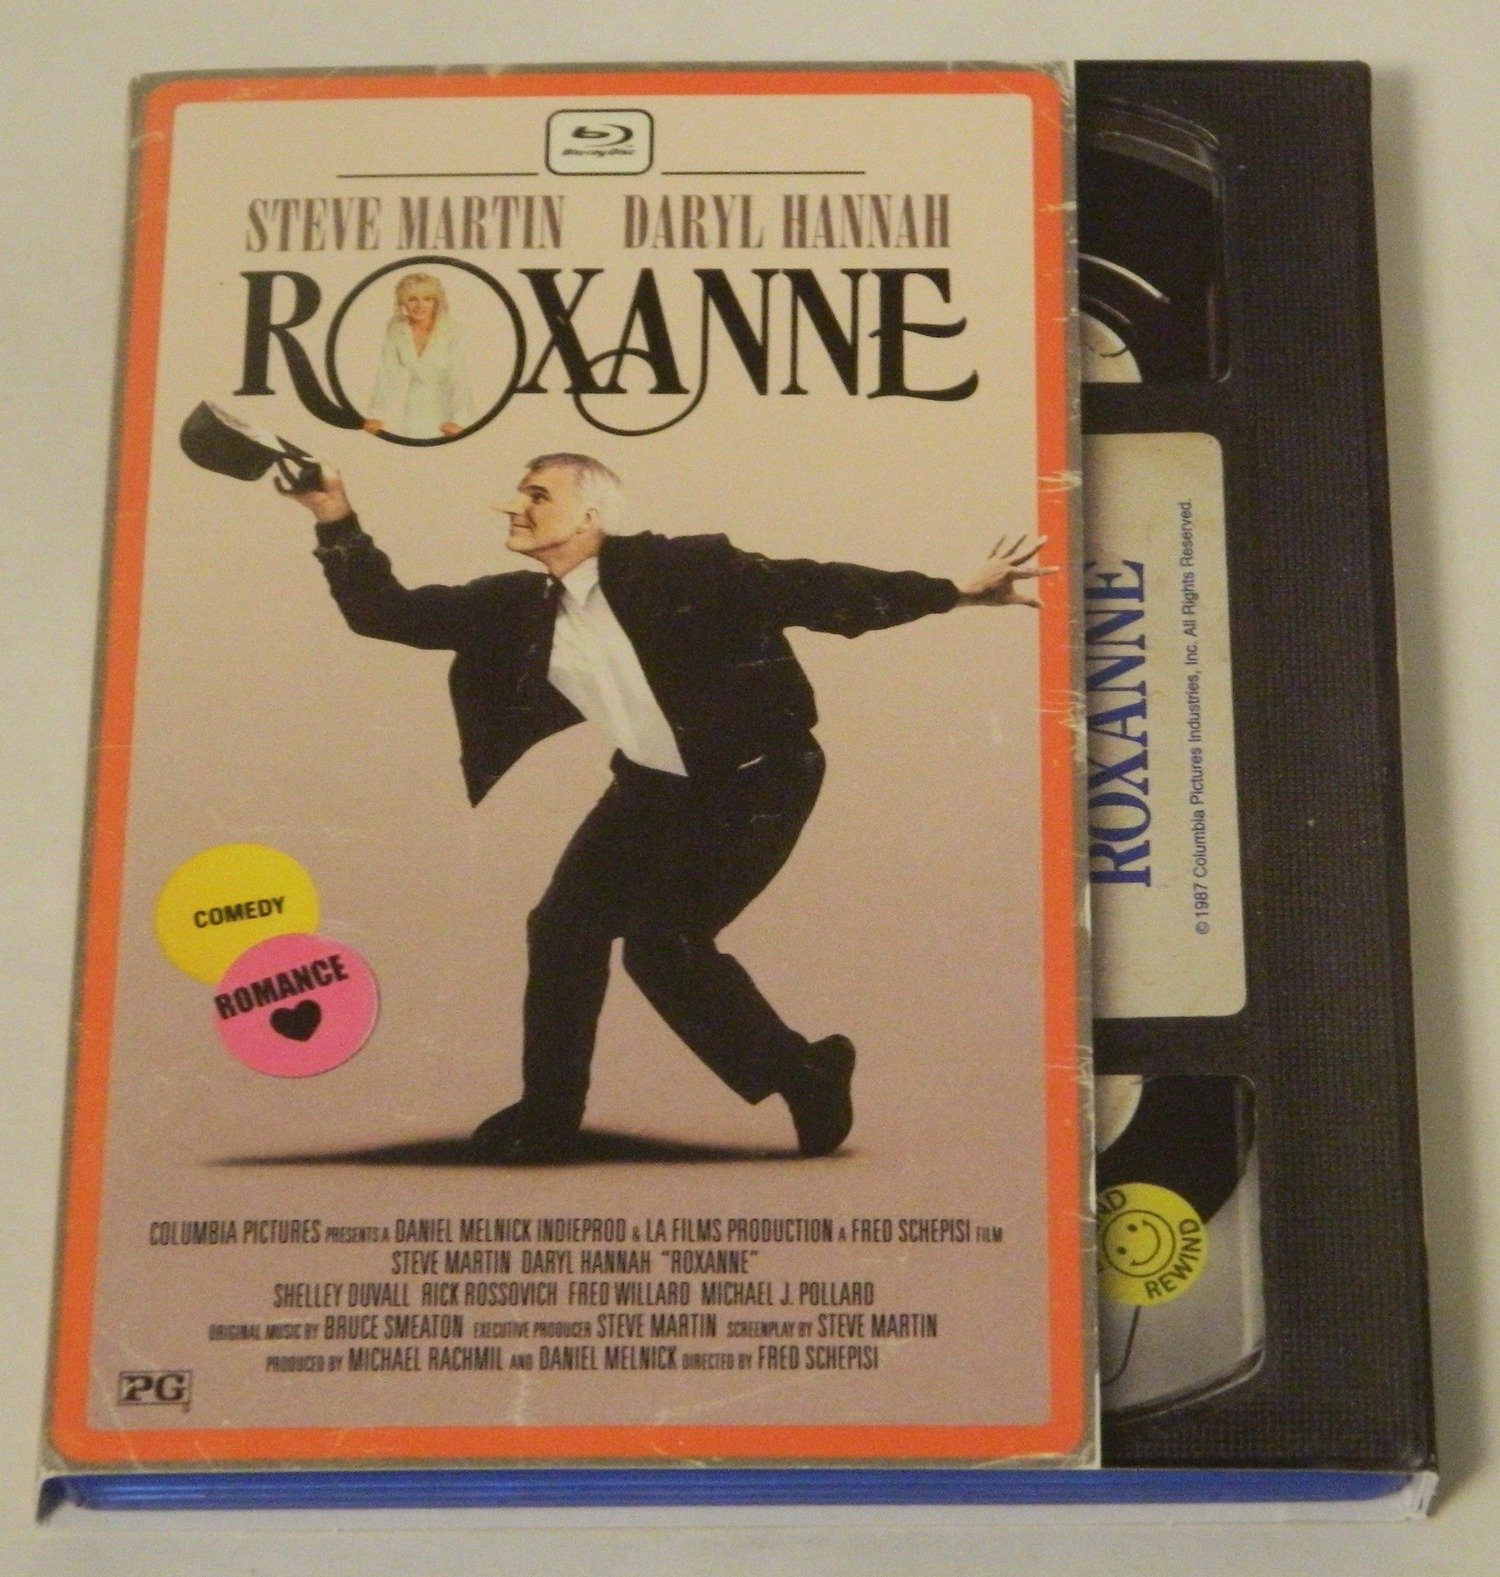 Roxanne Retro VHS Cover Art Blu-ray Review